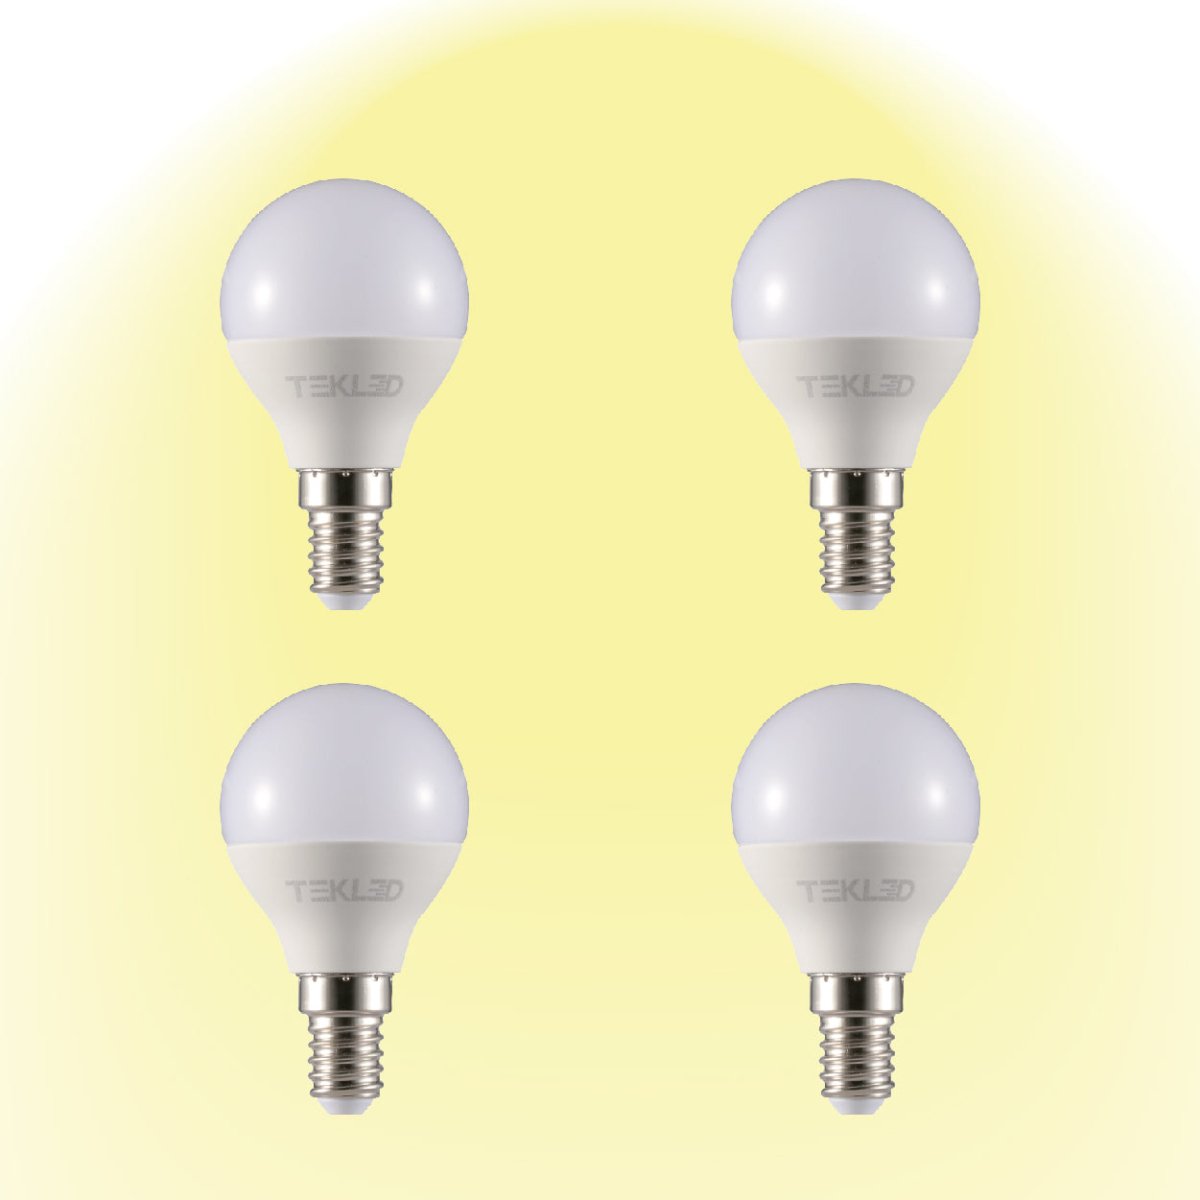 3000K warm white Canes LED Golf Ball Bulb P45 Dimmable E14 Small Edison Screw 6W 4 pack